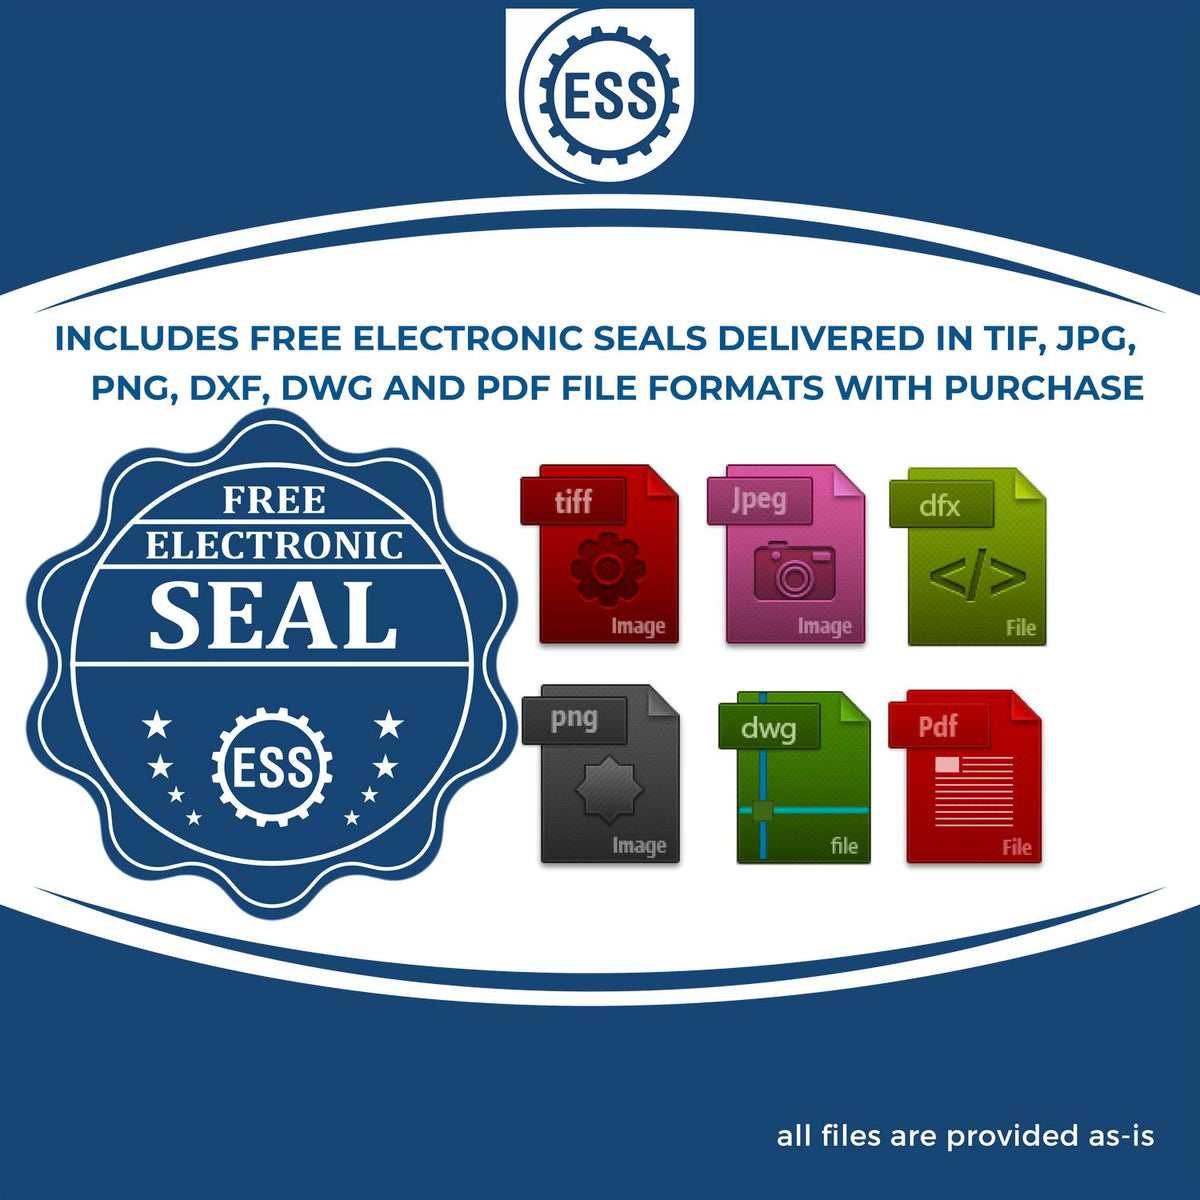 An infographic for the free electronic seal for the Hybrid South Carolina Landscape Architect Seal illustrating the different file type icons such as DXF, DWG, TIF, JPG and PNG.